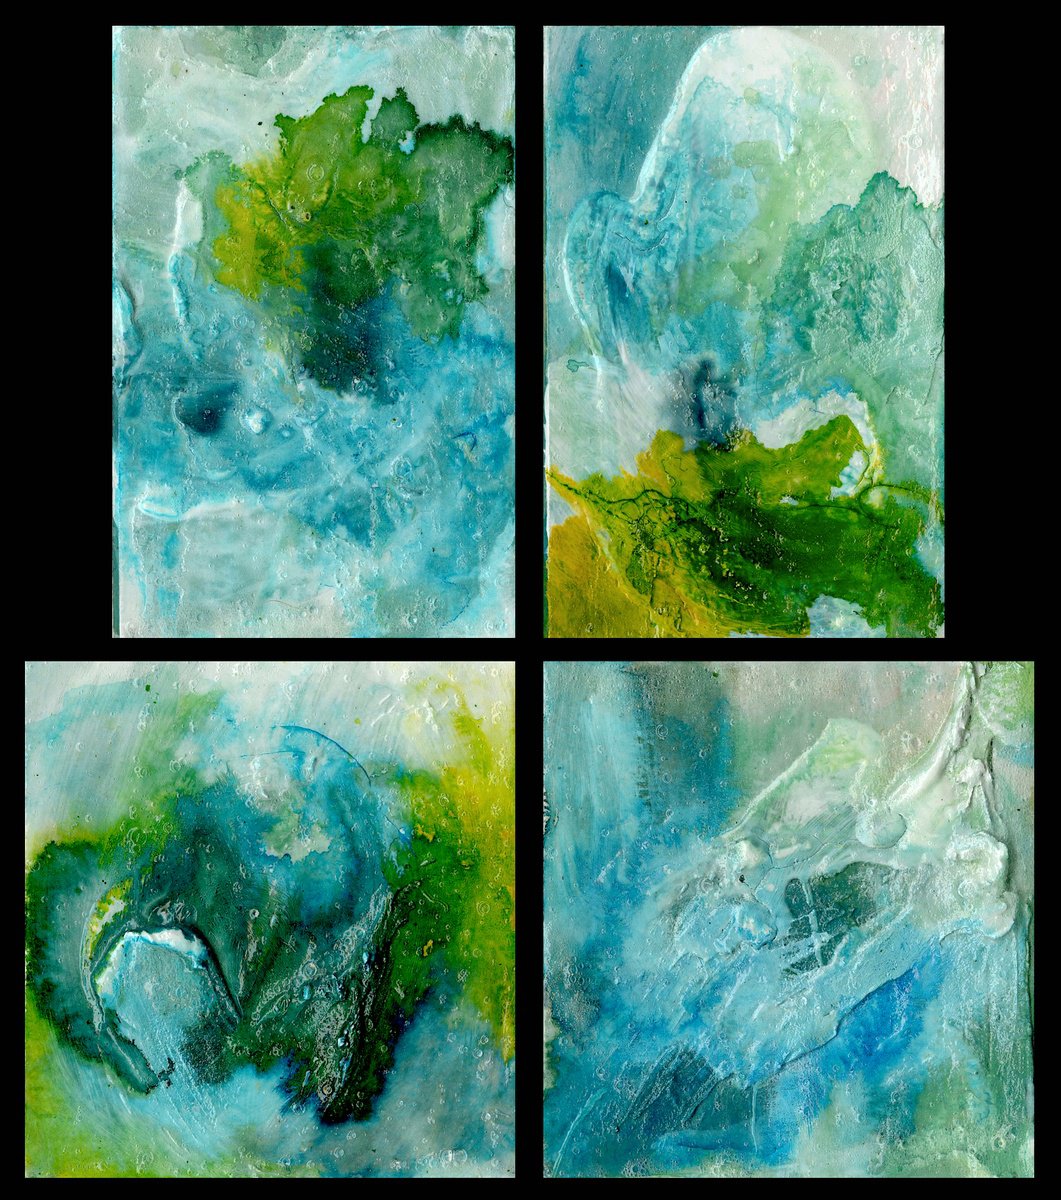 Ethereal Dream Collection 1 - 4 Small Mixed Media Paintings by Kathy Morton Stanion by Kathy Morton Stanion